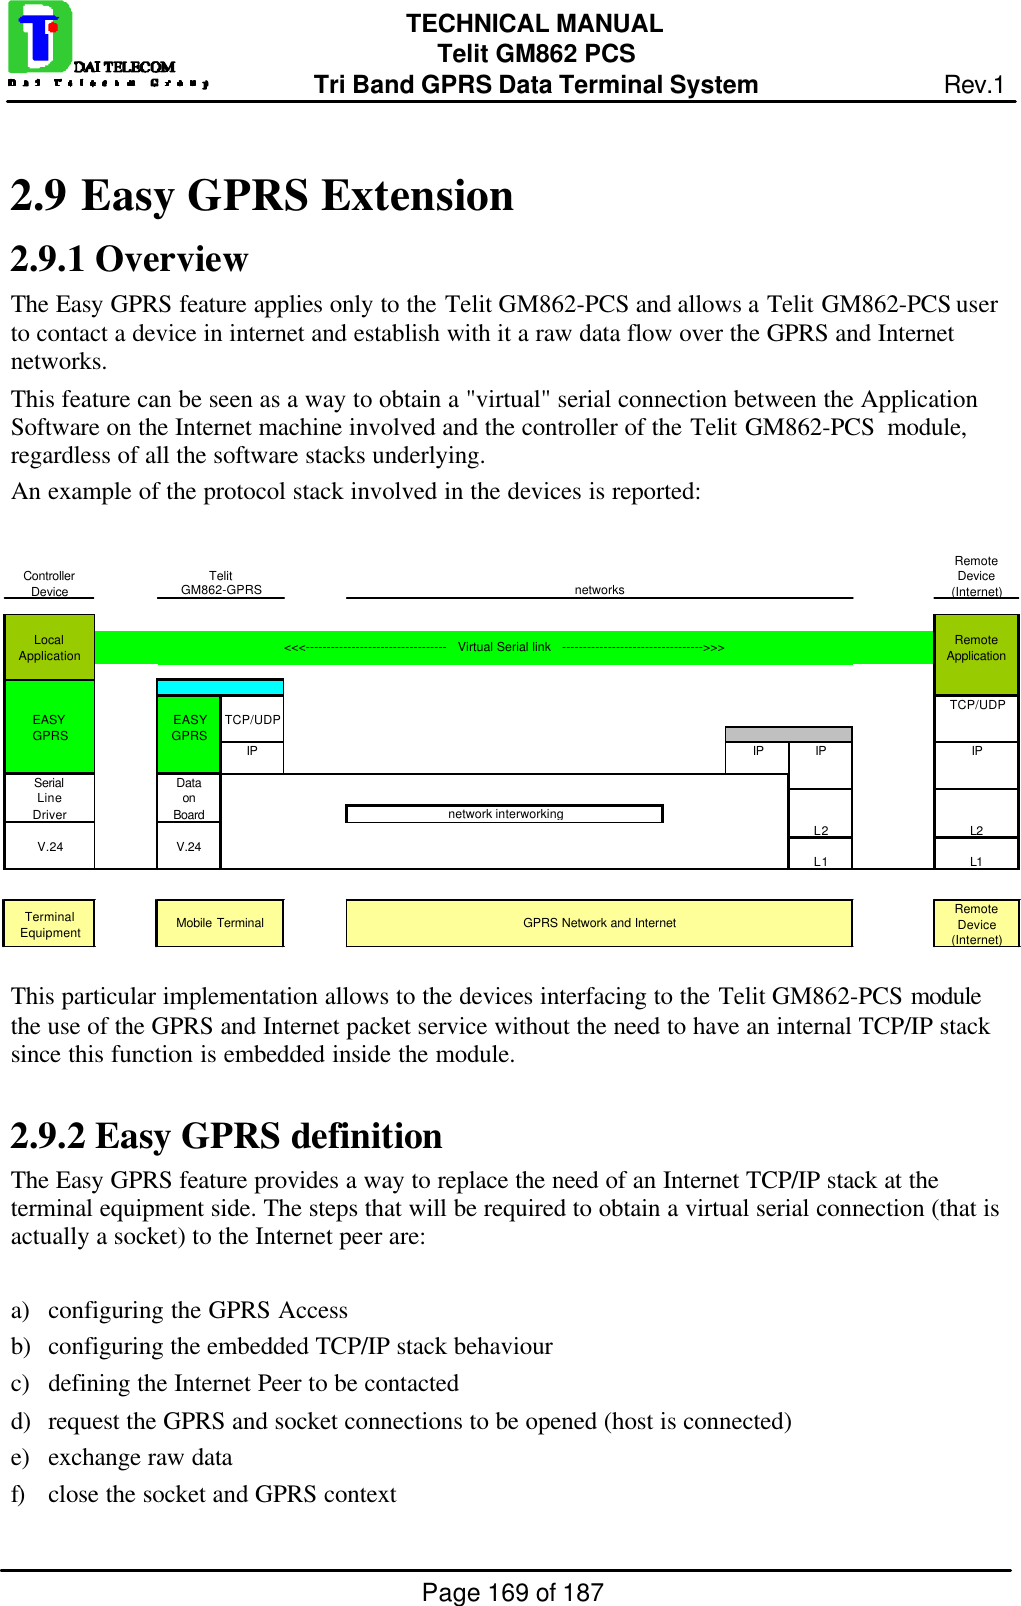 Page 169 of 187TECHNICAL MANUALTelit GM862 PCSTri Band GPRS Data Terminal System Rev.12.9  Easy GPRS Extension2.9.1  OverviewThe Easy GPRS feature applies only to the Telit GM862-PCS and allows a Telit GM862-PCS userto contact a device in internet and establish with it a raw data flow over the GPRS and Internetnetworks.This feature can be seen as a way to obtain a &quot;virtual&quot; serial connection between the ApplicationSoftware on the Internet machine involved and the controller of the Telit GM862-PCS  module,regardless of all the software stacks underlying.An example of the protocol stack involved in the devices is reported:This particular implementation allows to the devices interfacing to the Telit GM862-PCS modulethe use of the GPRS and Internet packet service without the need to have an internal TCP/IP stacksince this function is embedded inside the module.2.9.2  Easy GPRS definitionThe Easy GPRS feature provides a way to replace the need of an Internet TCP/IP stack at theterminal equipment side. The steps that will be required to obtain a virtual serial connection (that isactually a socket) to the Internet peer are:a) configuring the GPRS Accessb) configuring the embedded TCP/IP stack behaviourc) defining the Internet Peer to be contactedd) request the GPRS and socket connections to be opened (host is connected)e) exchange raw dataf) close the socket and GPRS contextRemoteControllerDeviceDevice(Internet) Local RemoteApplicationApplicationTCP/UDPEASYEASYTCP/UDPGPRSGPRSIPIPIPIPSerialDataLine onDriverBoardL2L2V.24V.24L1L1Terminal EquipmentRemote Device  (Internet) TelitGM862-GPRSnetworks&lt;&lt;&lt;----------------------------------   Virtual Serial link   ----------------------------------&gt;&gt;&gt;network interworkingMobile Terminal GPRS Network and Internet